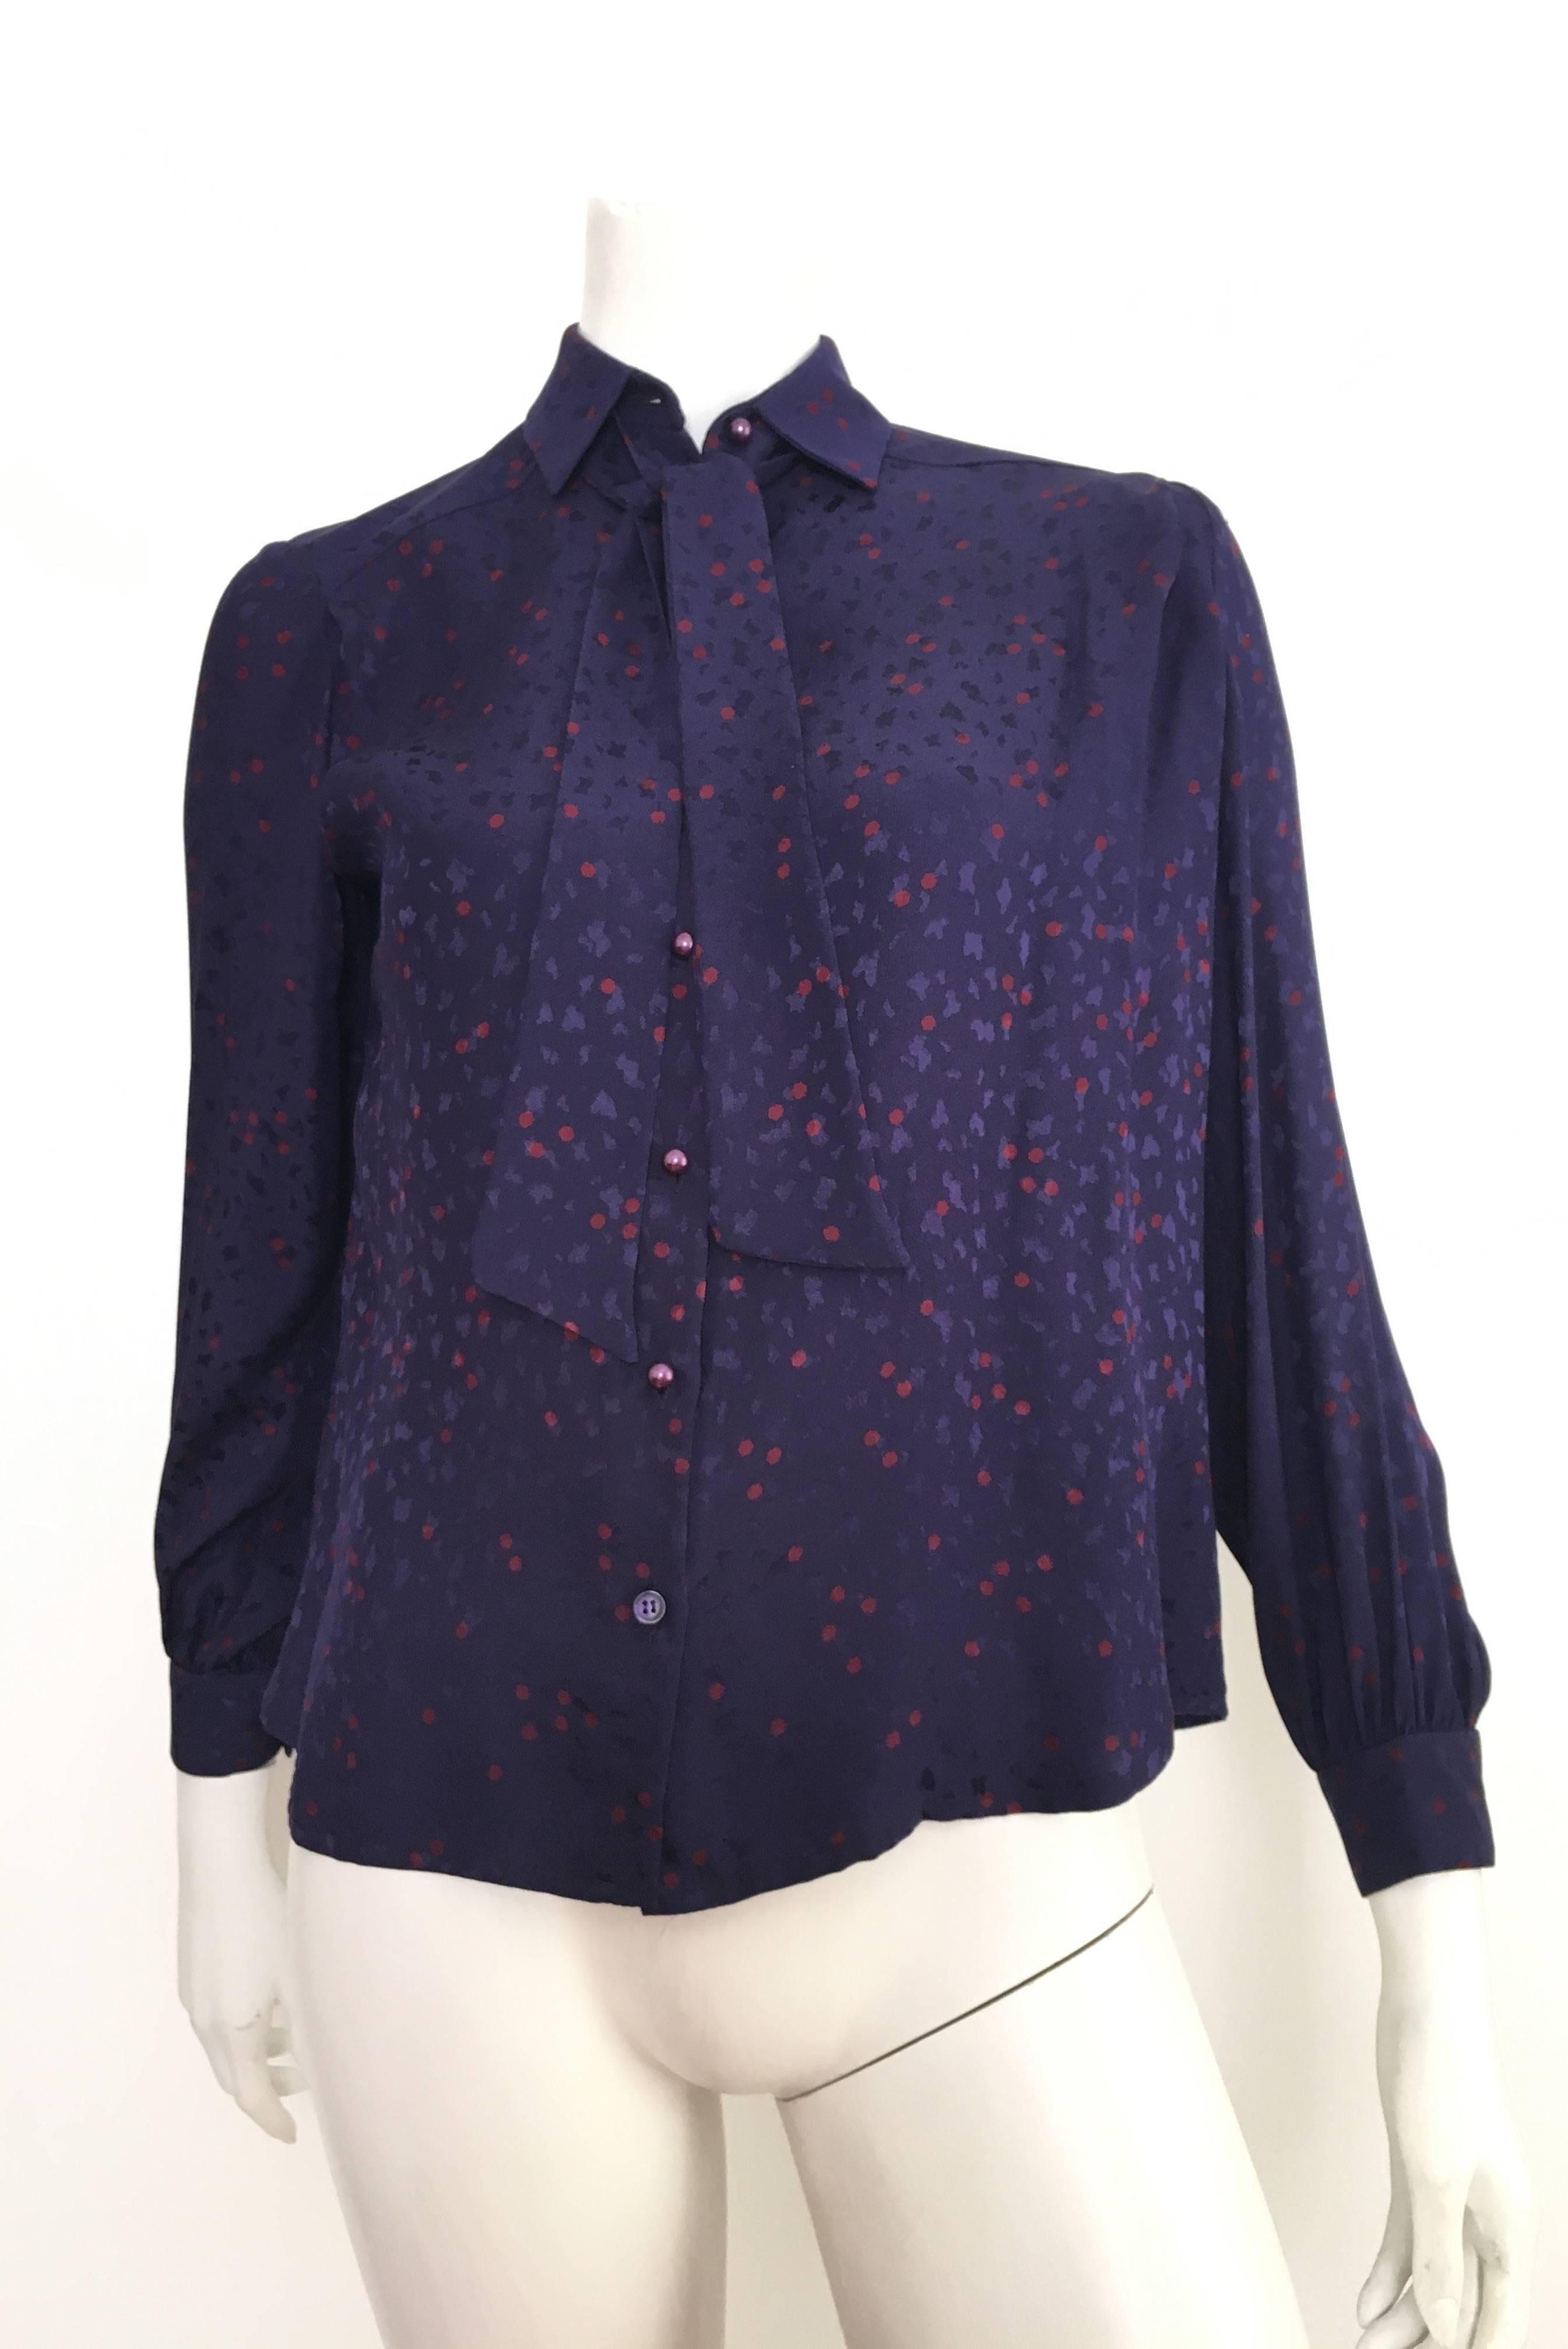 David Hayes for Saks Fifth Avenue 1984 navy silk blouse with matching silk jacket set is a size 4. Matilda the mannequin is a size 4 and this fits her beautifully.  Ladies please grab your trusted measuring tape so you can properly measure your bust